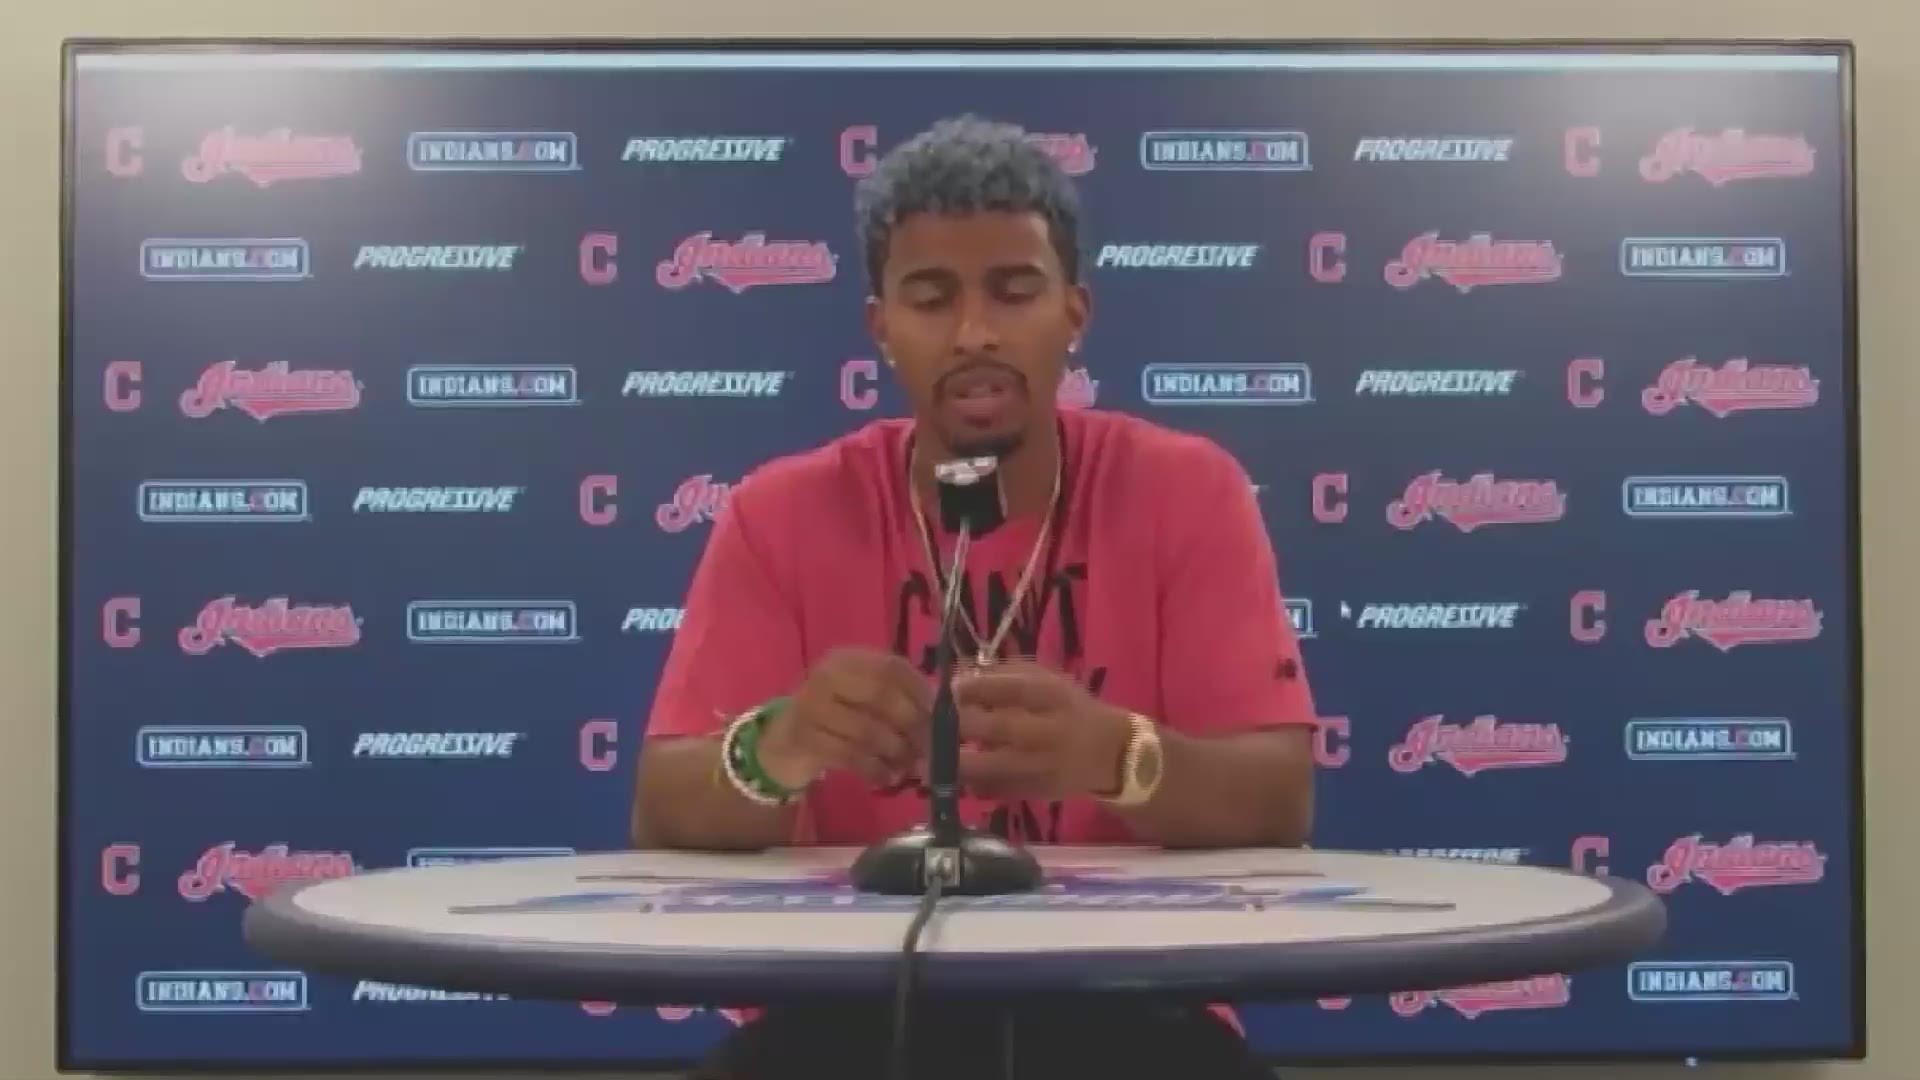 Open to change! Francisco Lindor says he'd be open to the Cleveland Indians changing their name, if it "brings more love and more peace to society."